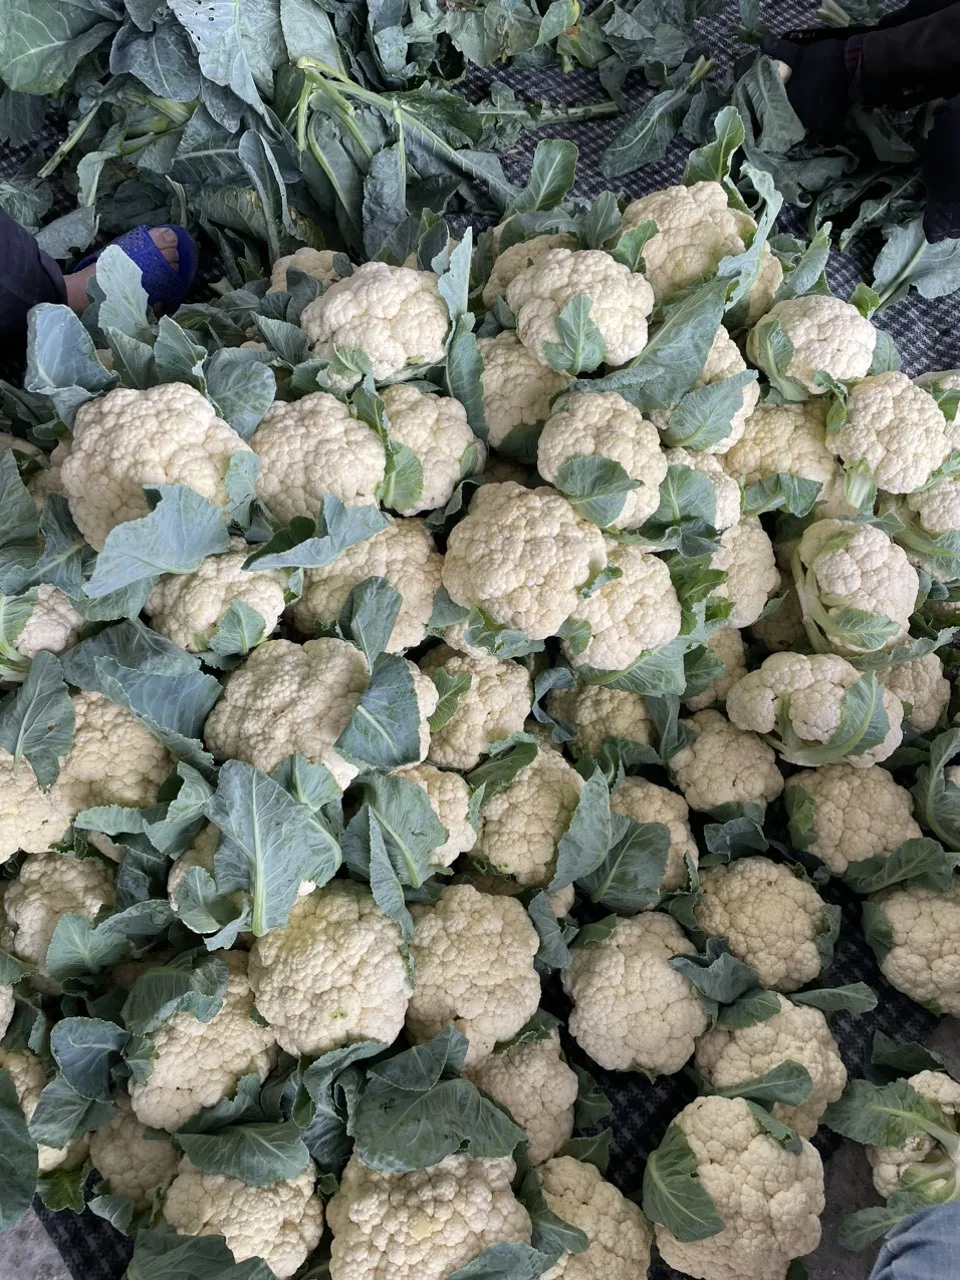 Vietnamese agricultural products white cauliflower weight 500g up high quality goods